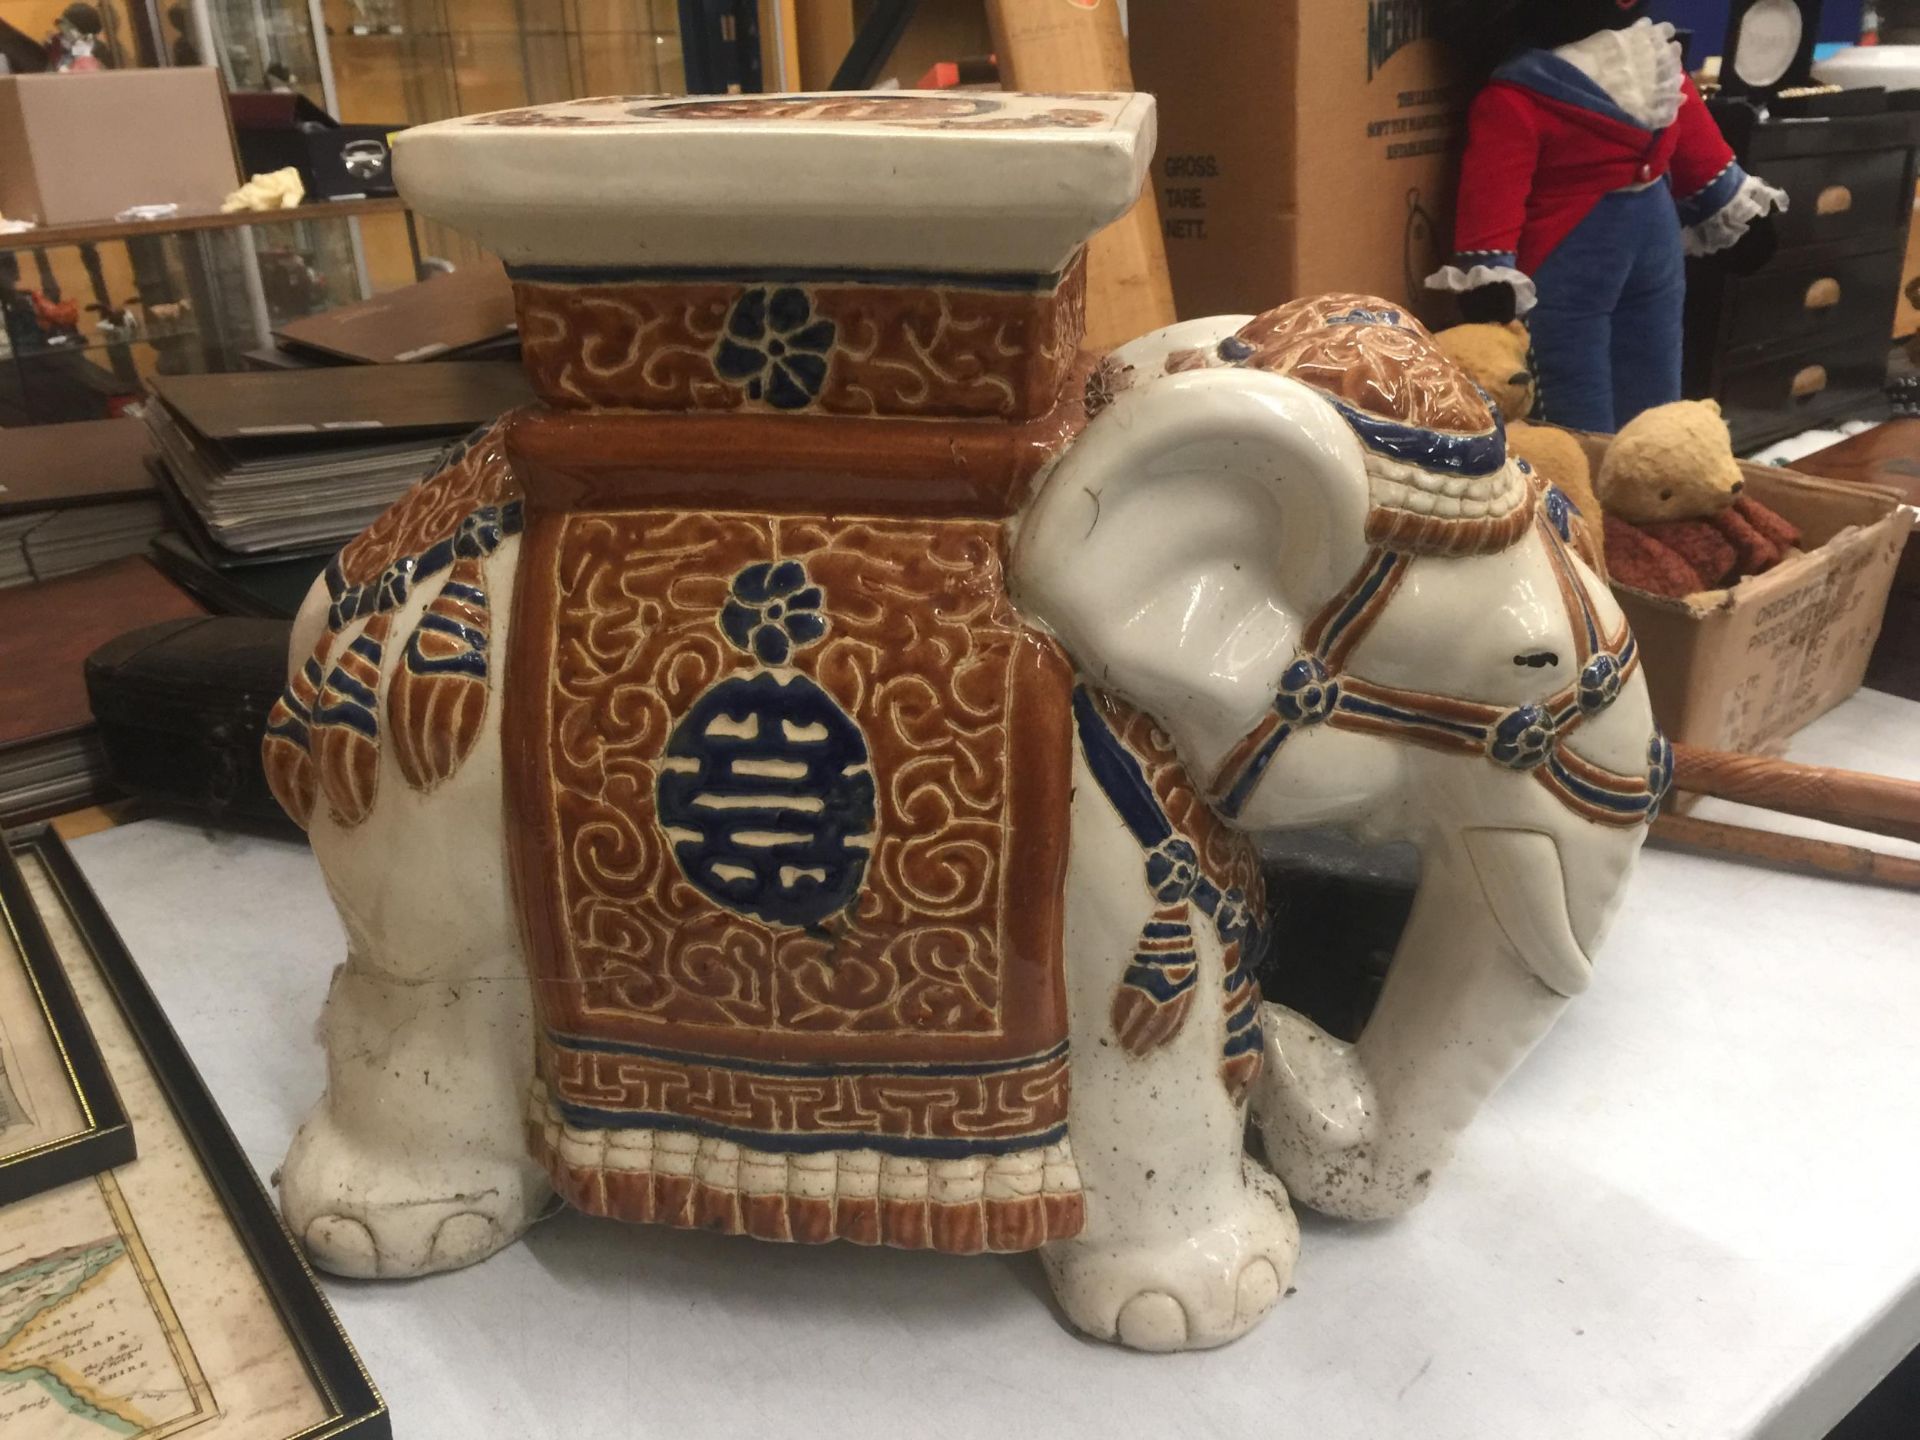 A LARGE CERAMIC ELEPHANT PLANT STAND/SEAT